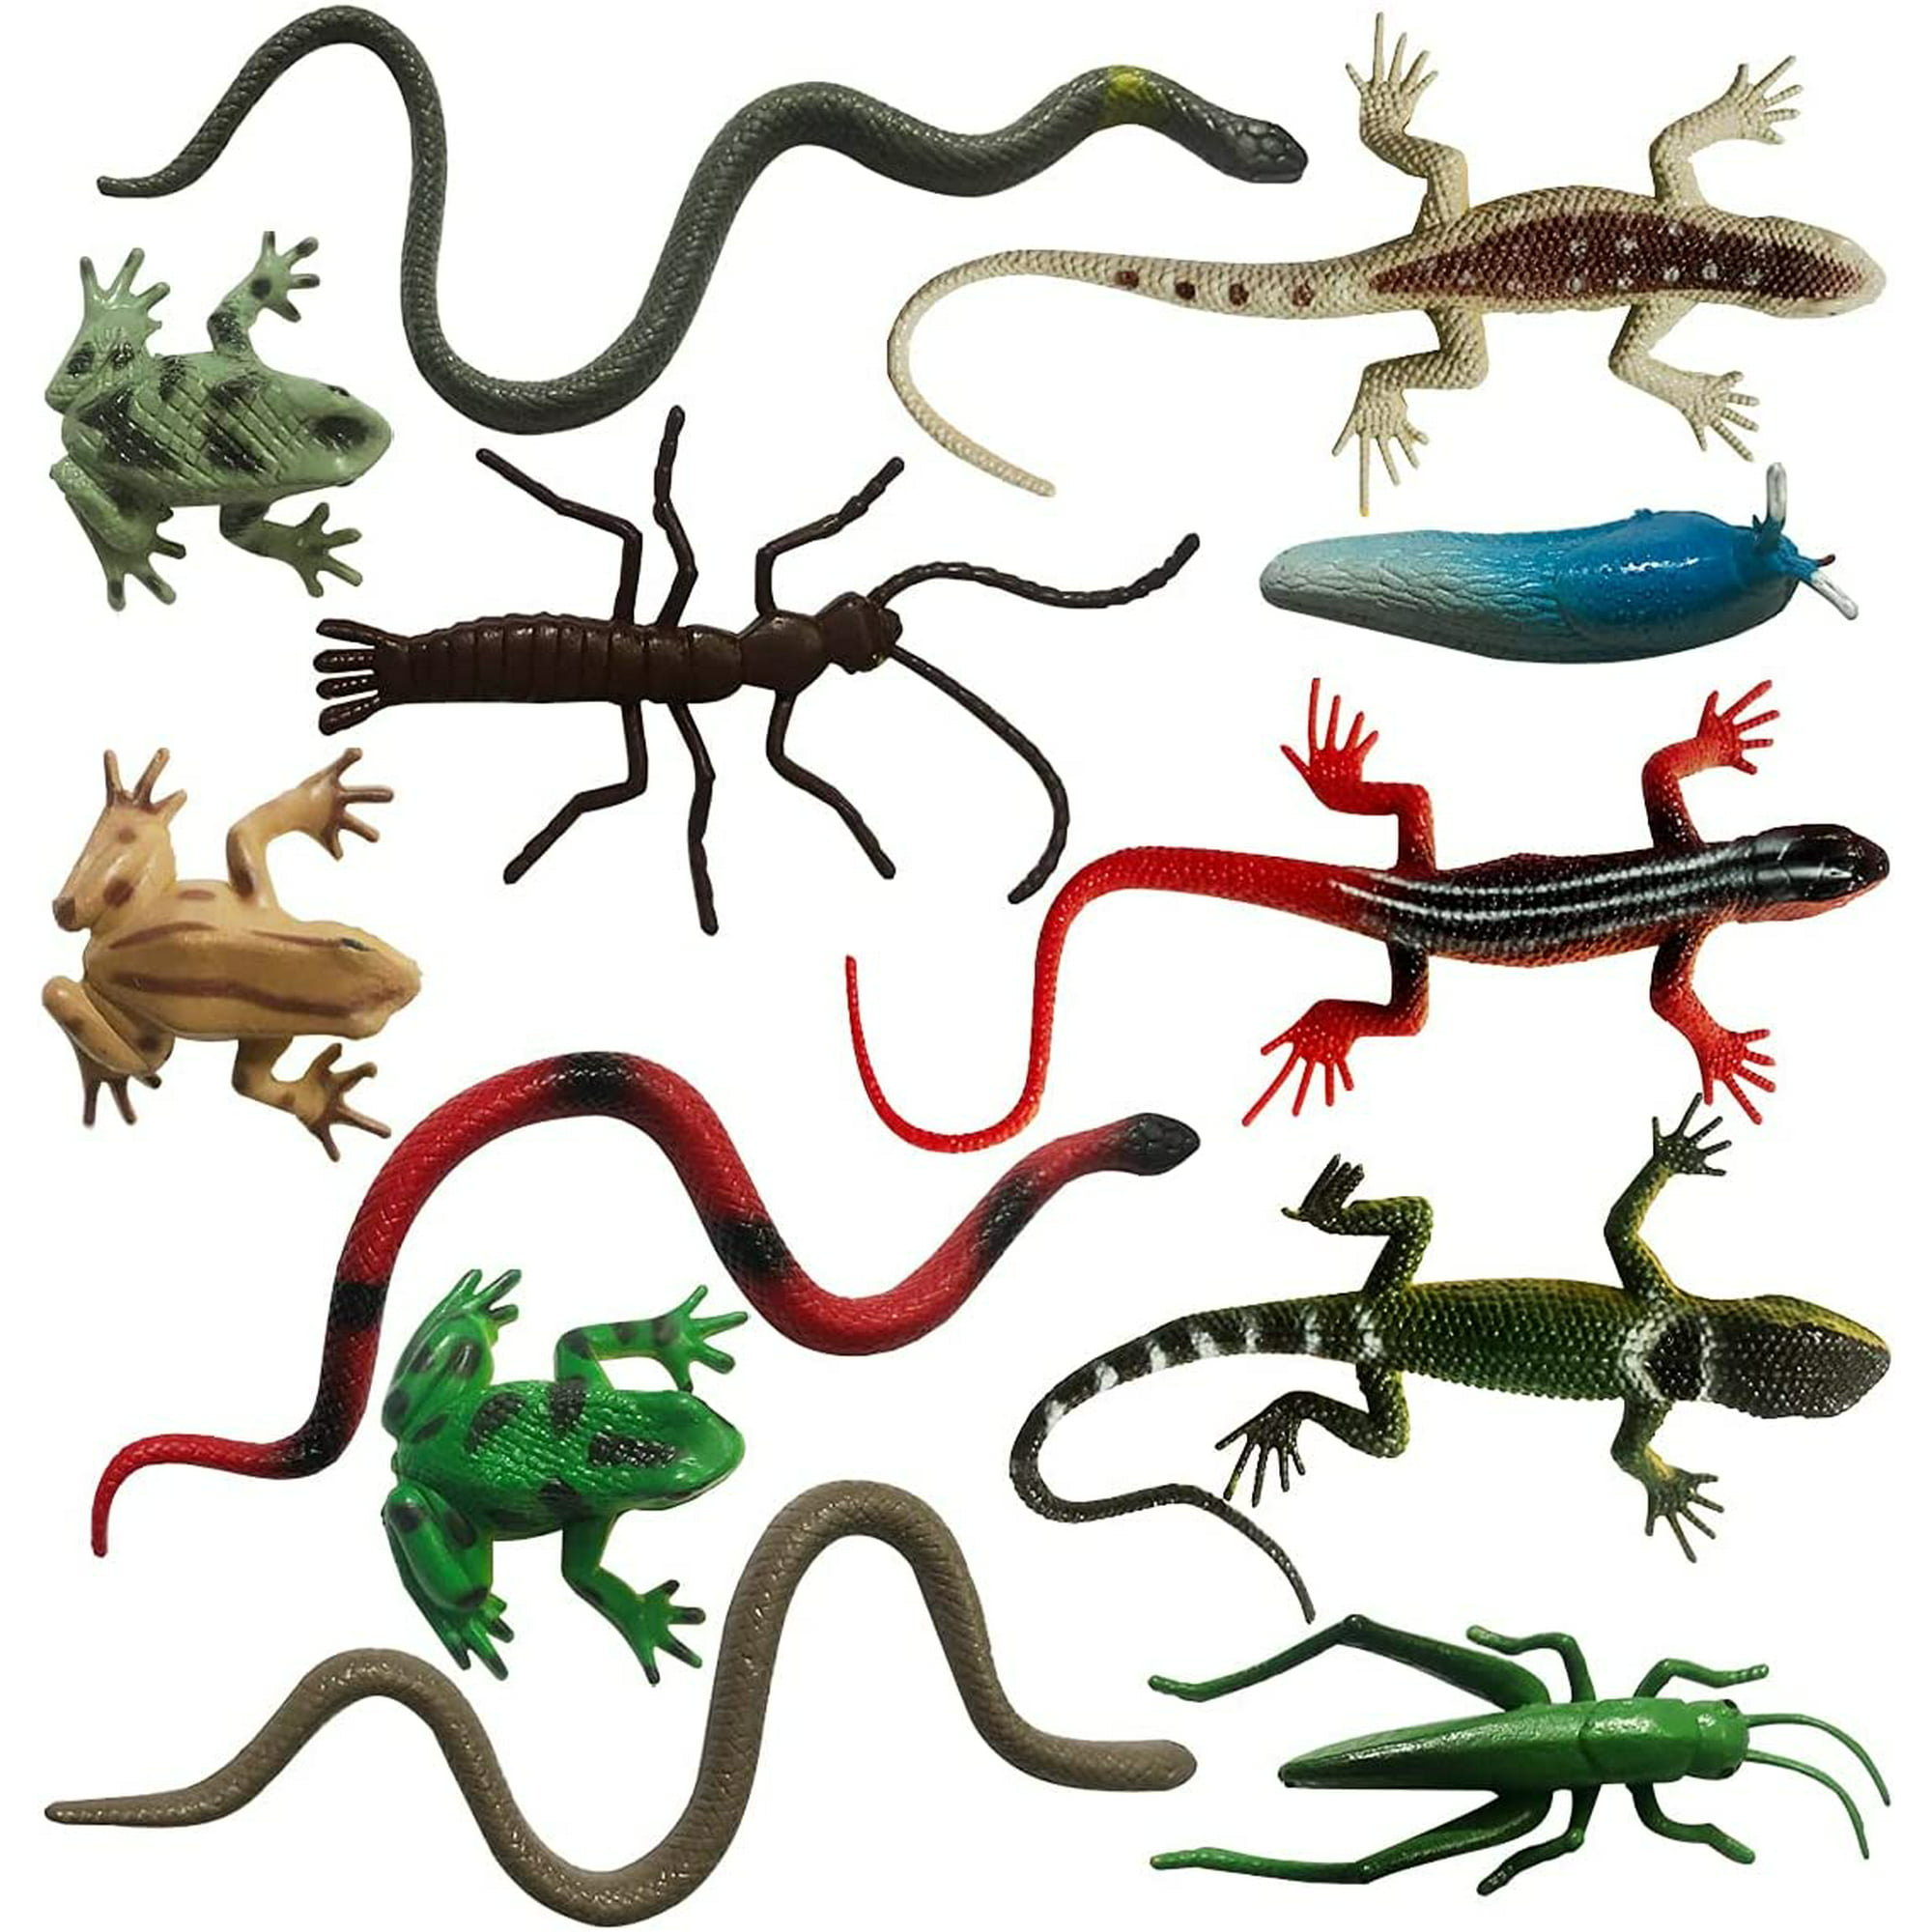 12pcs Frog Insect Snake Lizard Ant Farm Animal Fun Model Action Figure for  Kids Educational Children's Garden Toy | Walmart Canada